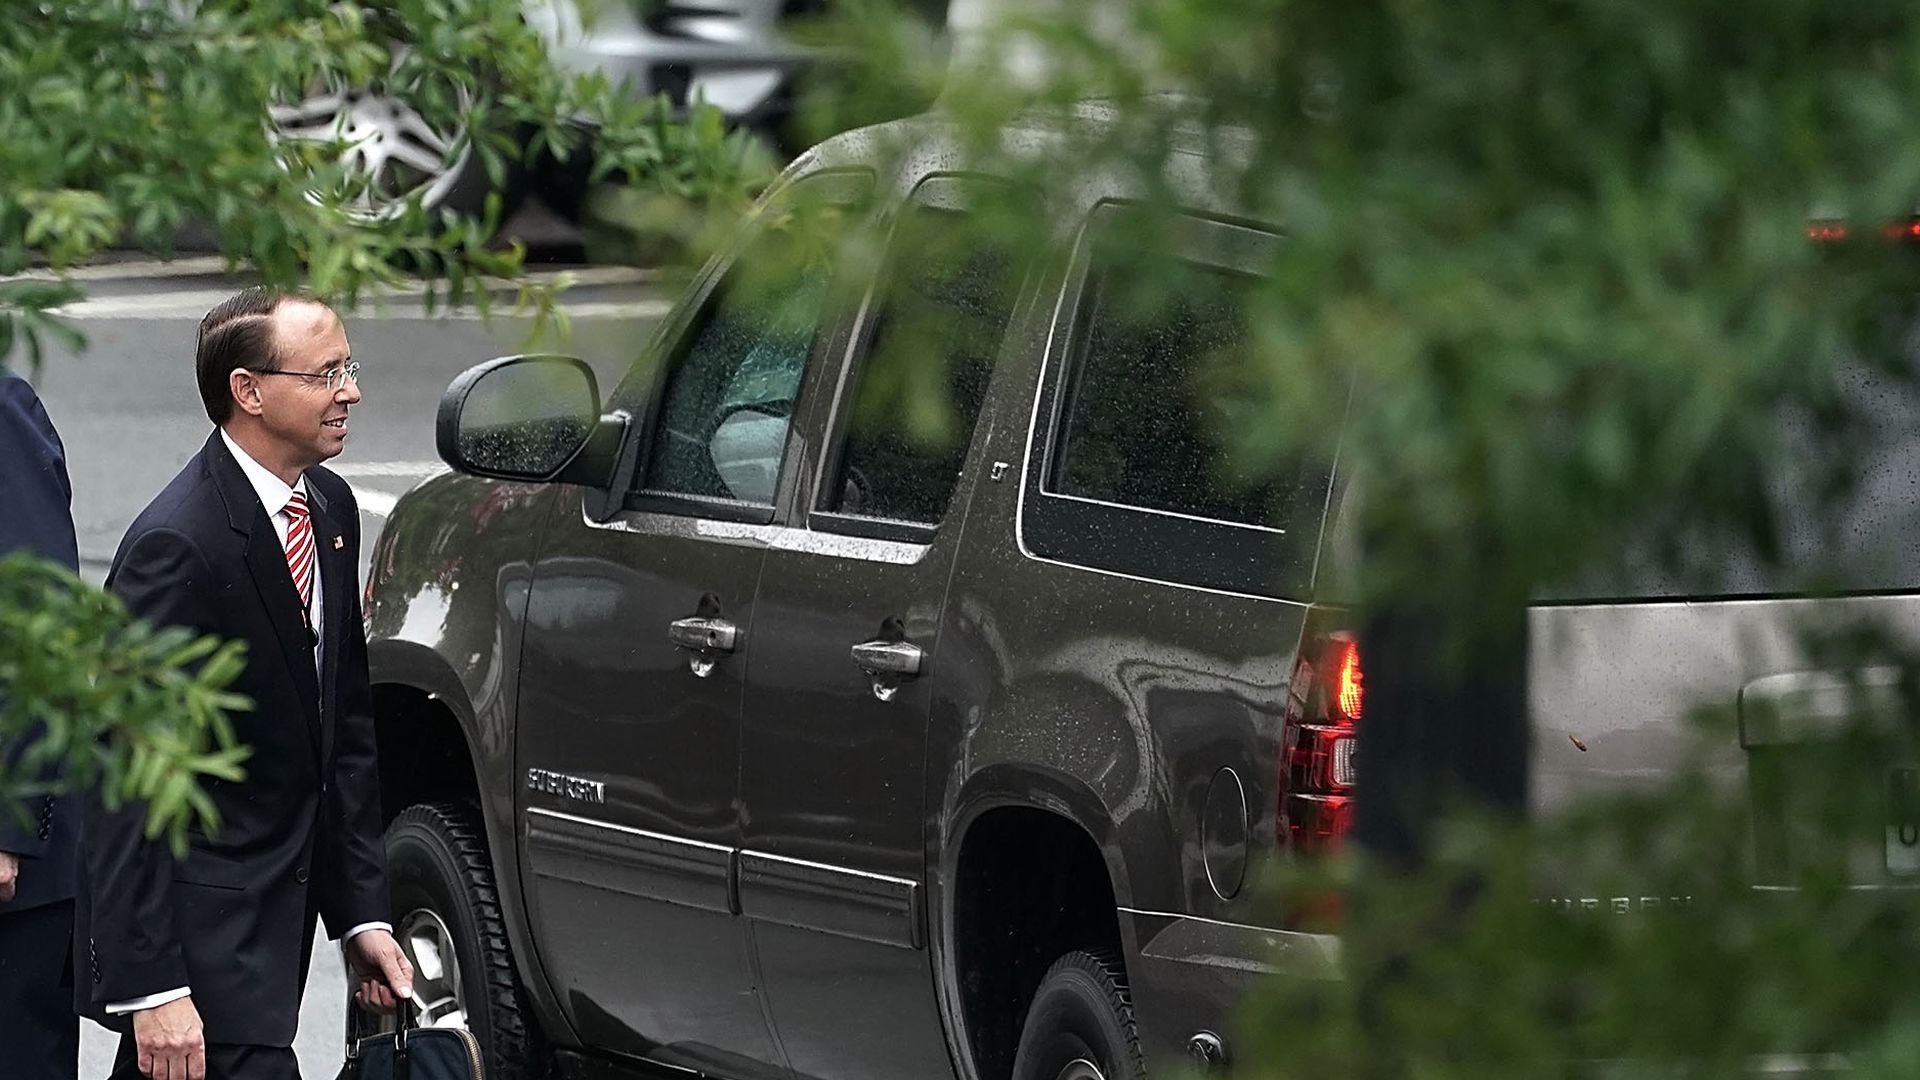 Rod Rosenstein walking near a car, with a tree shrouding the picture